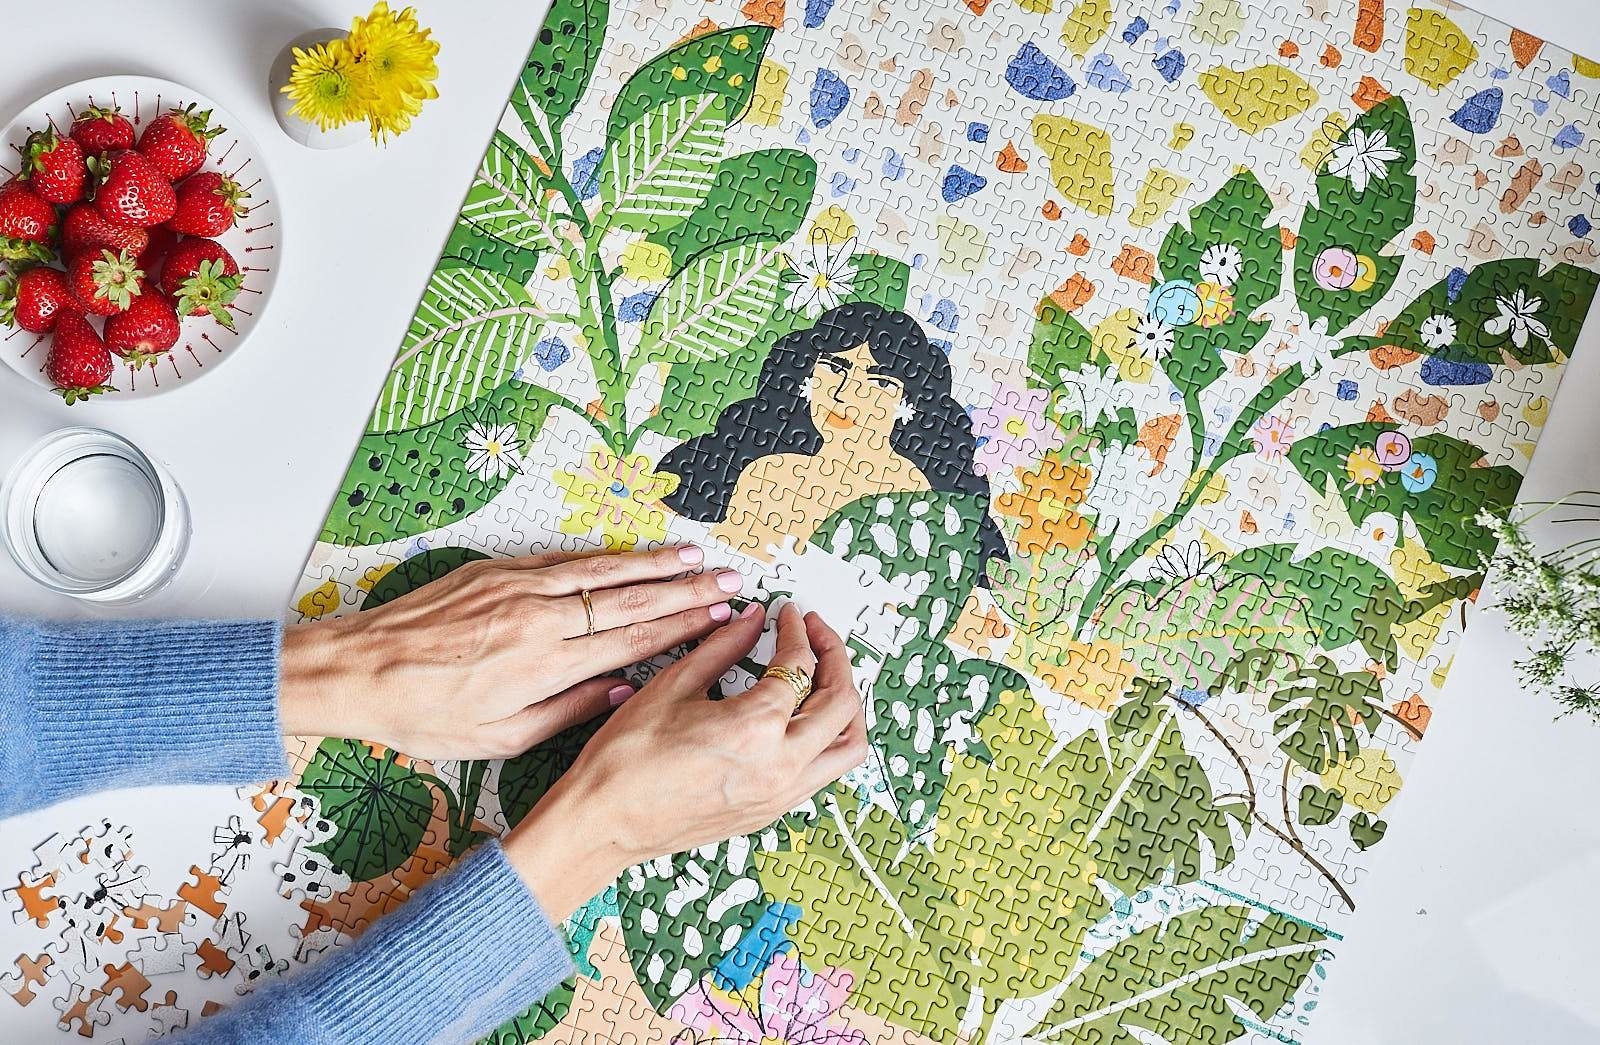 Hands putting together a puzzle of a person sitting in a bathtub surrounded by plants